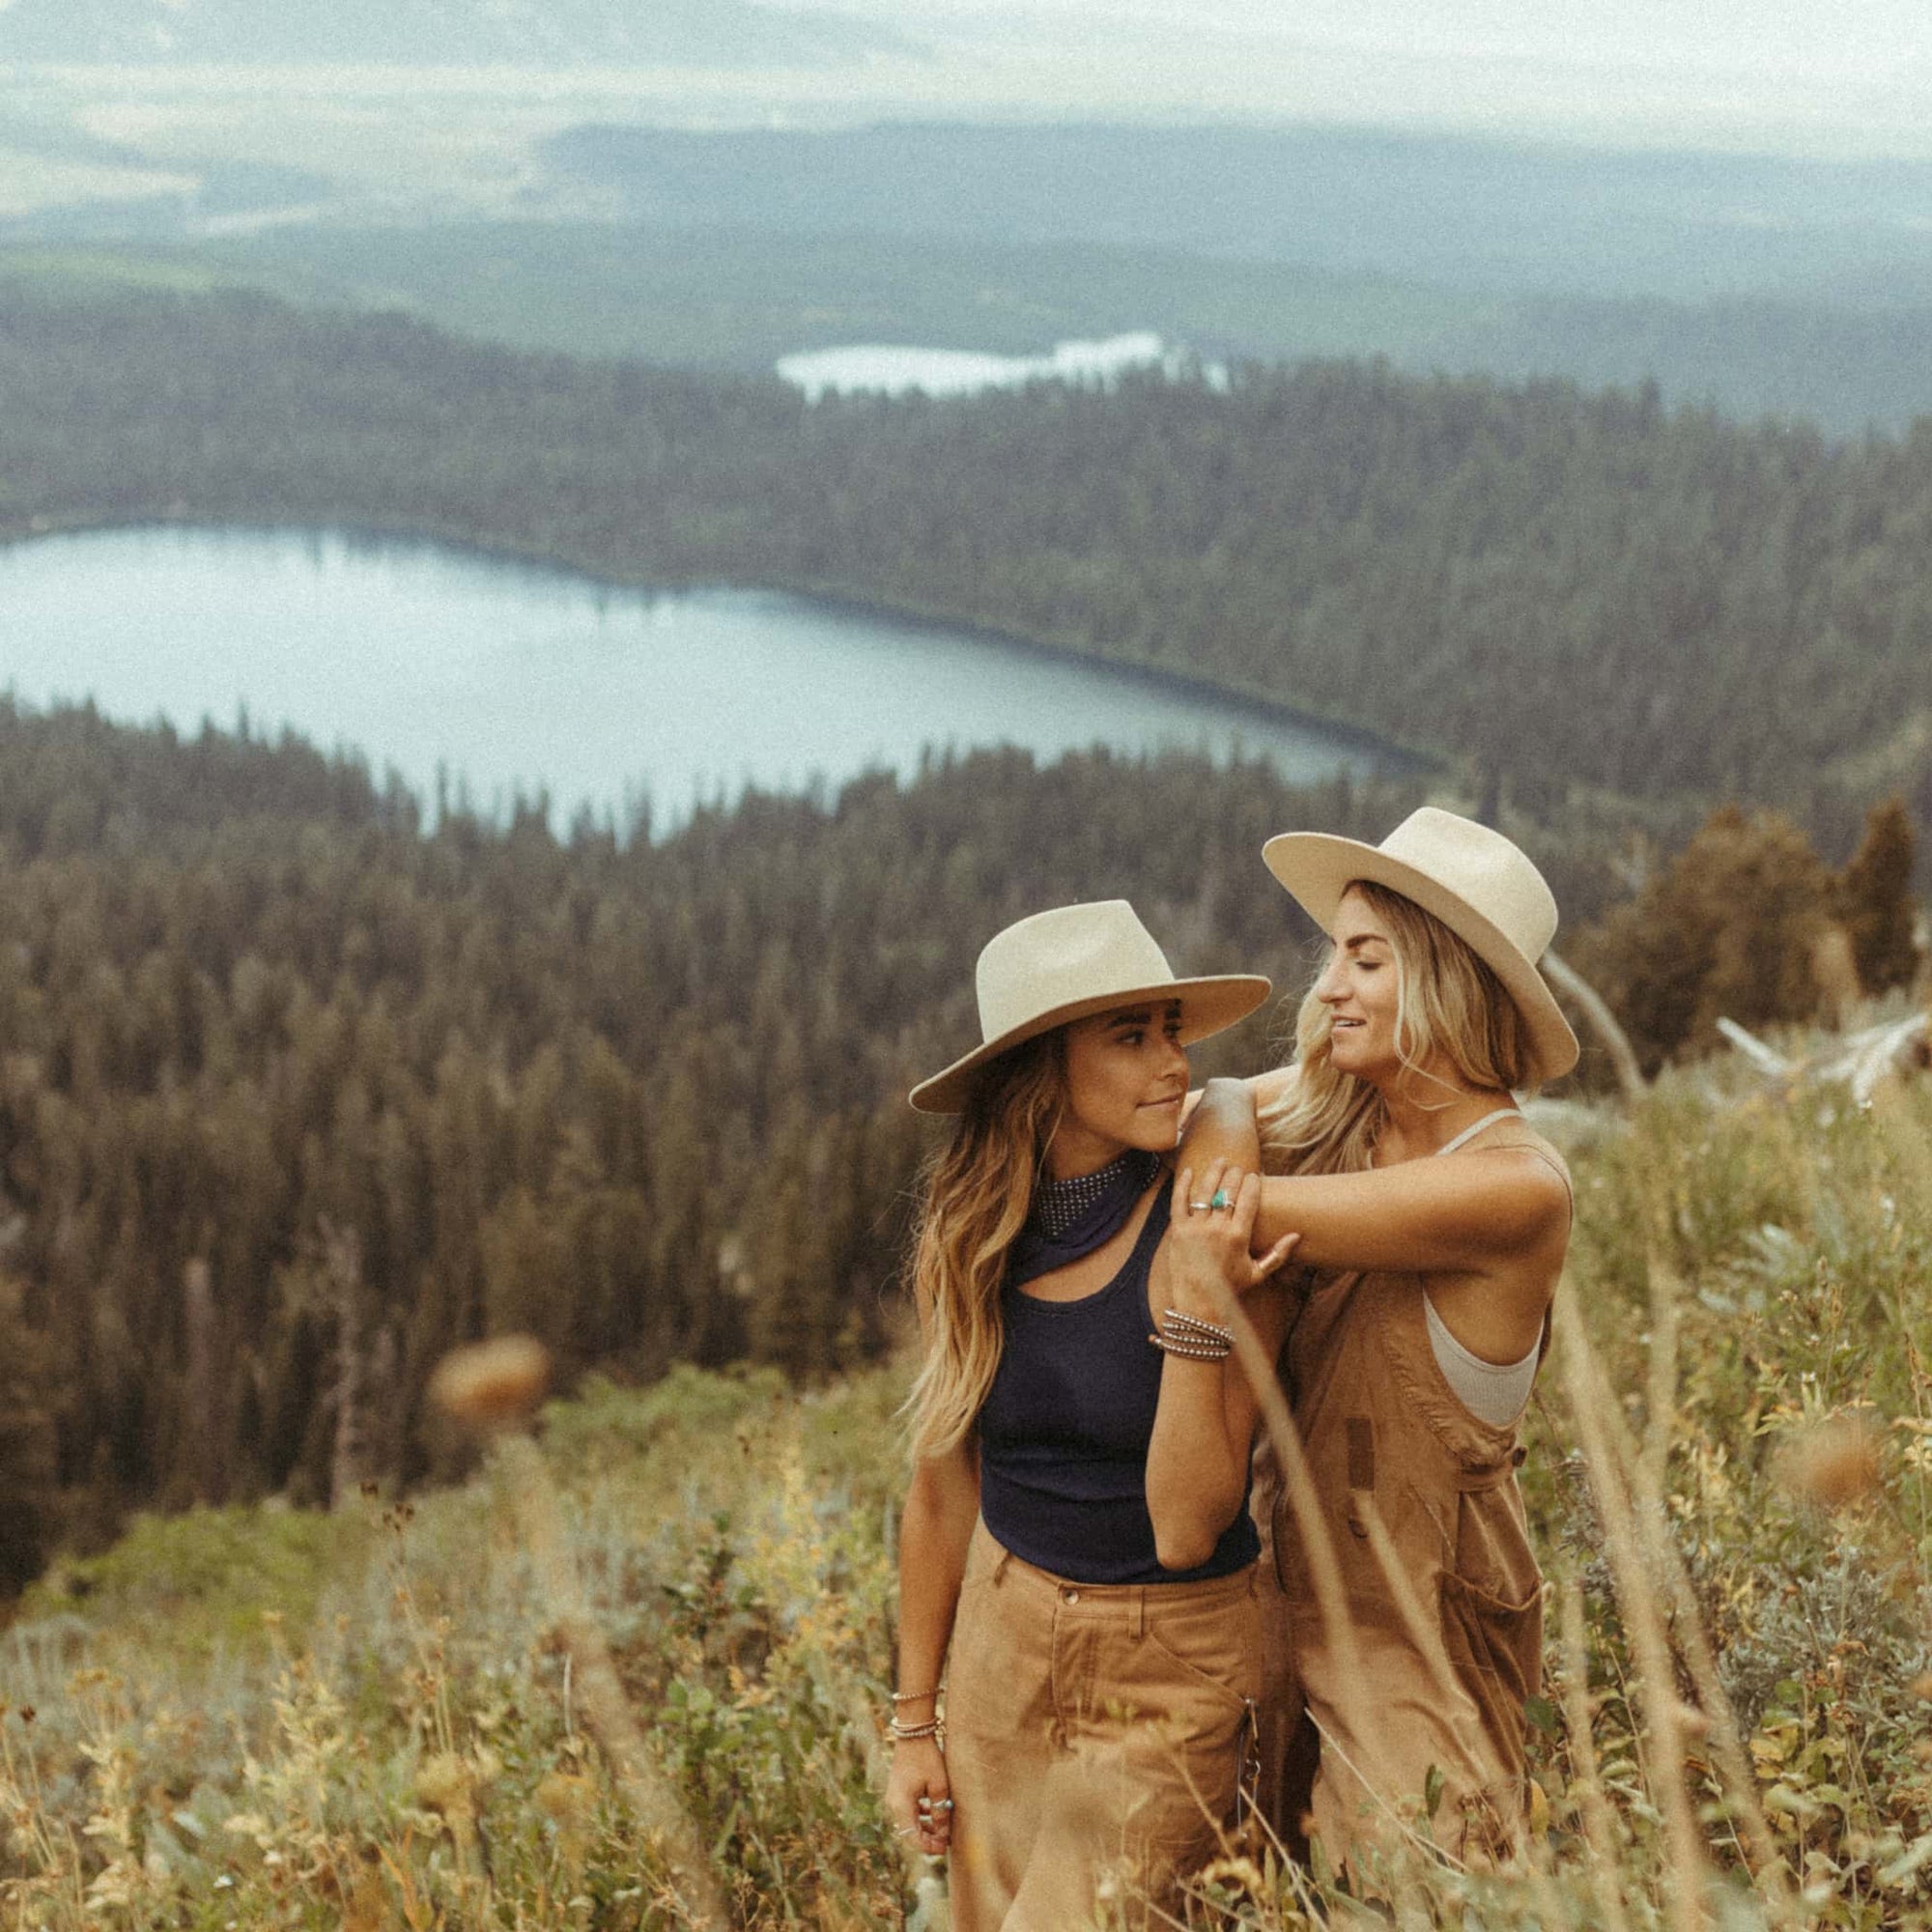 Taryn standing with her arms over Amanda while they stand in a grassy field on top of a mountain